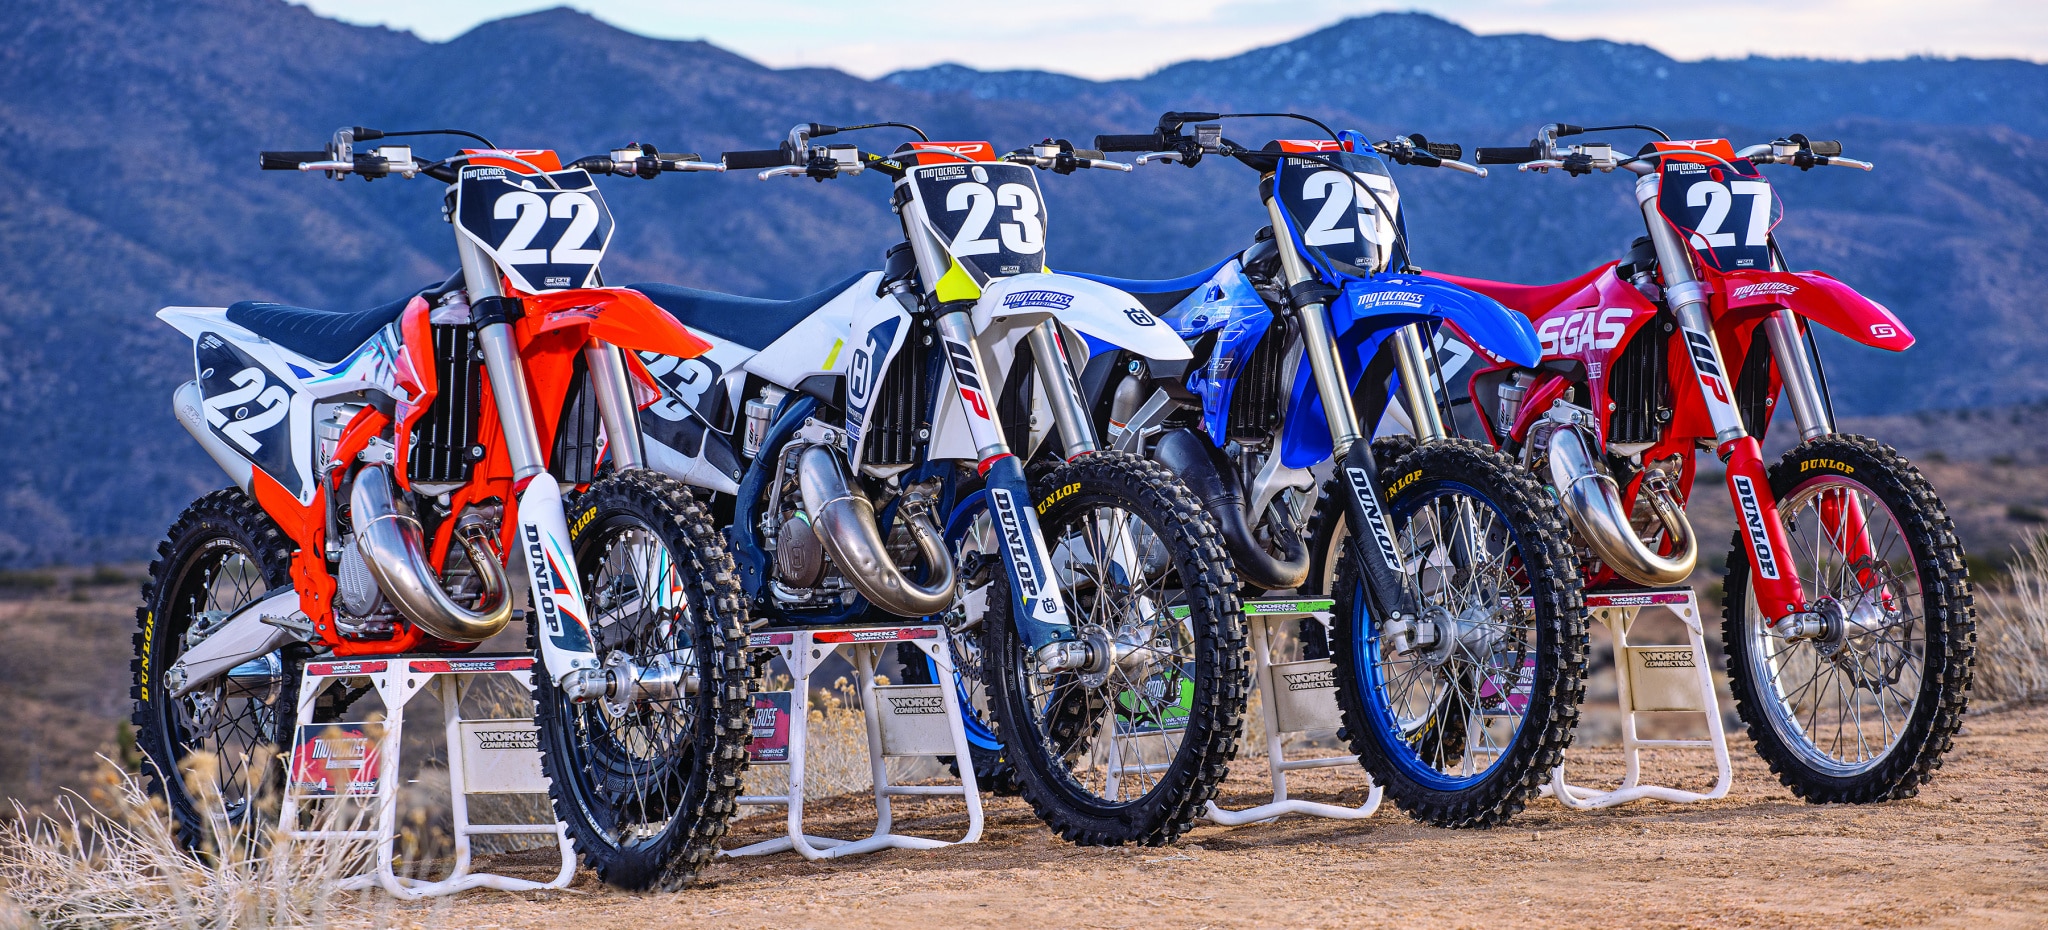 THE MUST-READ MOTOCROSS ACTION 2022 125 TWO-STROKE SHOOTOUT - Motocross  Action Magazine